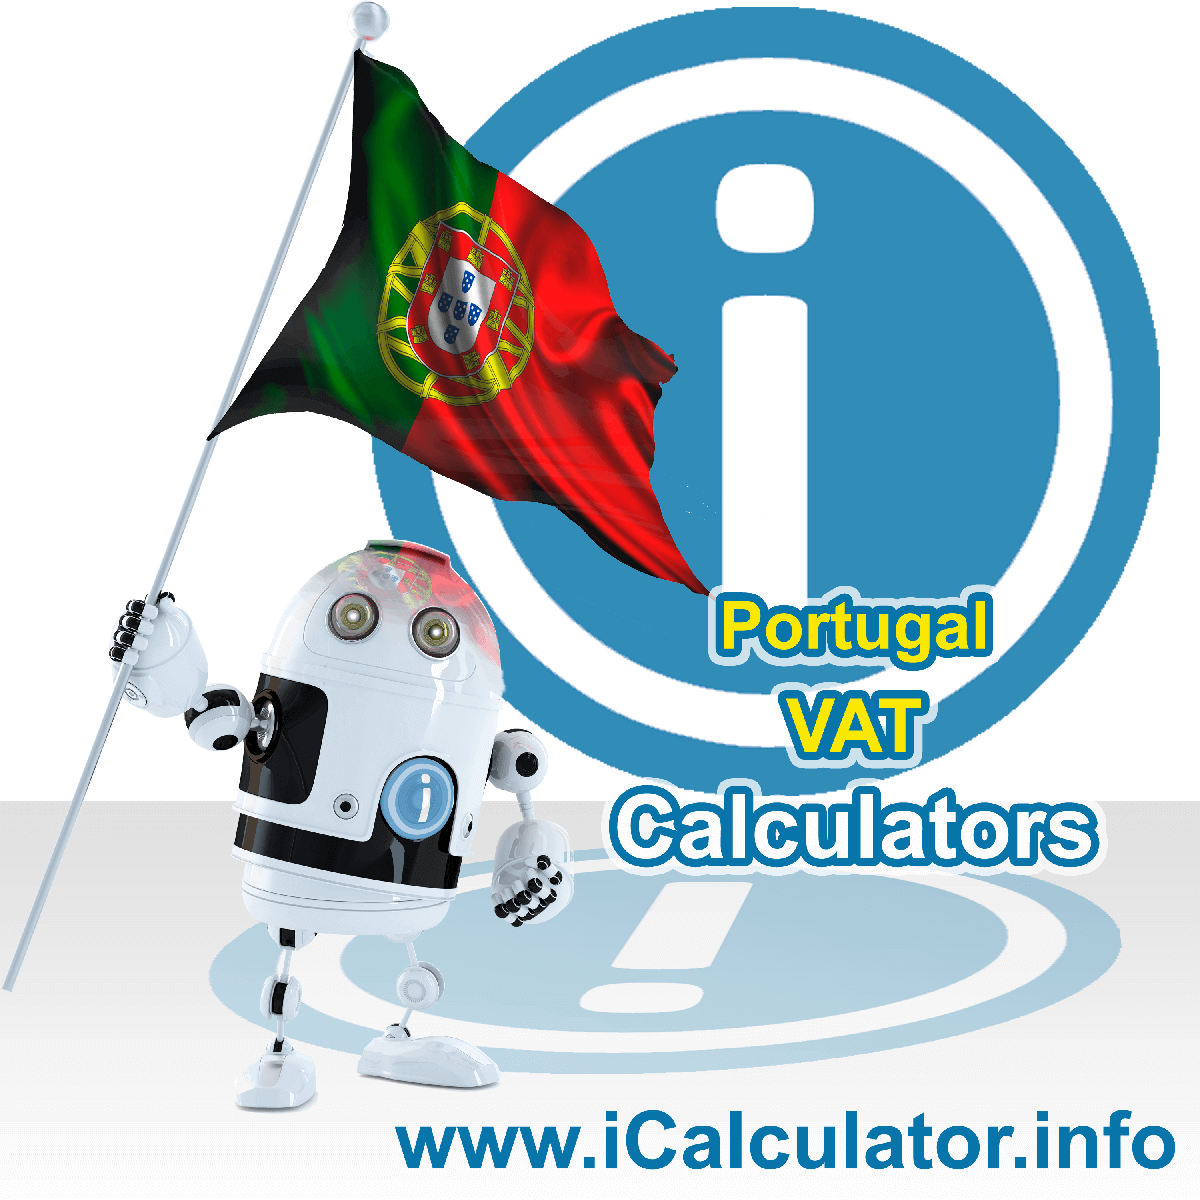 Portugal VAT Calculator. This image shows the Portugal flag and information relating to the VAT formula used for calculating Value Added Tax in Portugal using the Portugal VAT Calculator in 2023